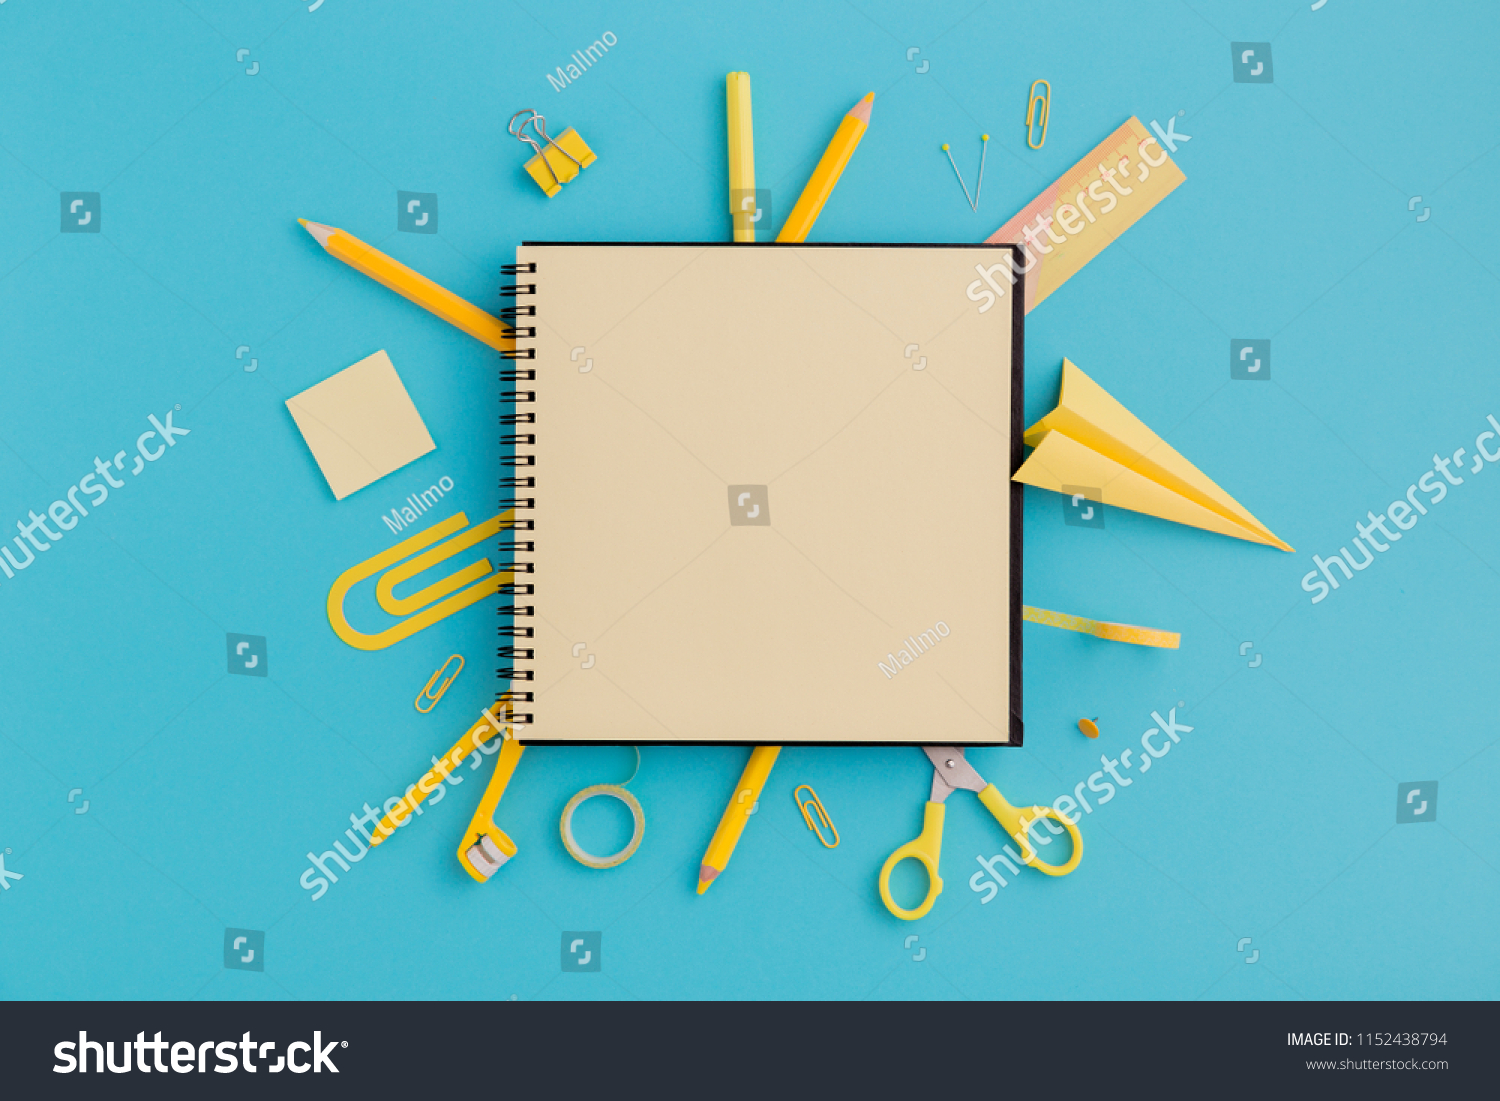 School notebook and various stationery. Back to school concept. Creative flat lay desk. #1152438794